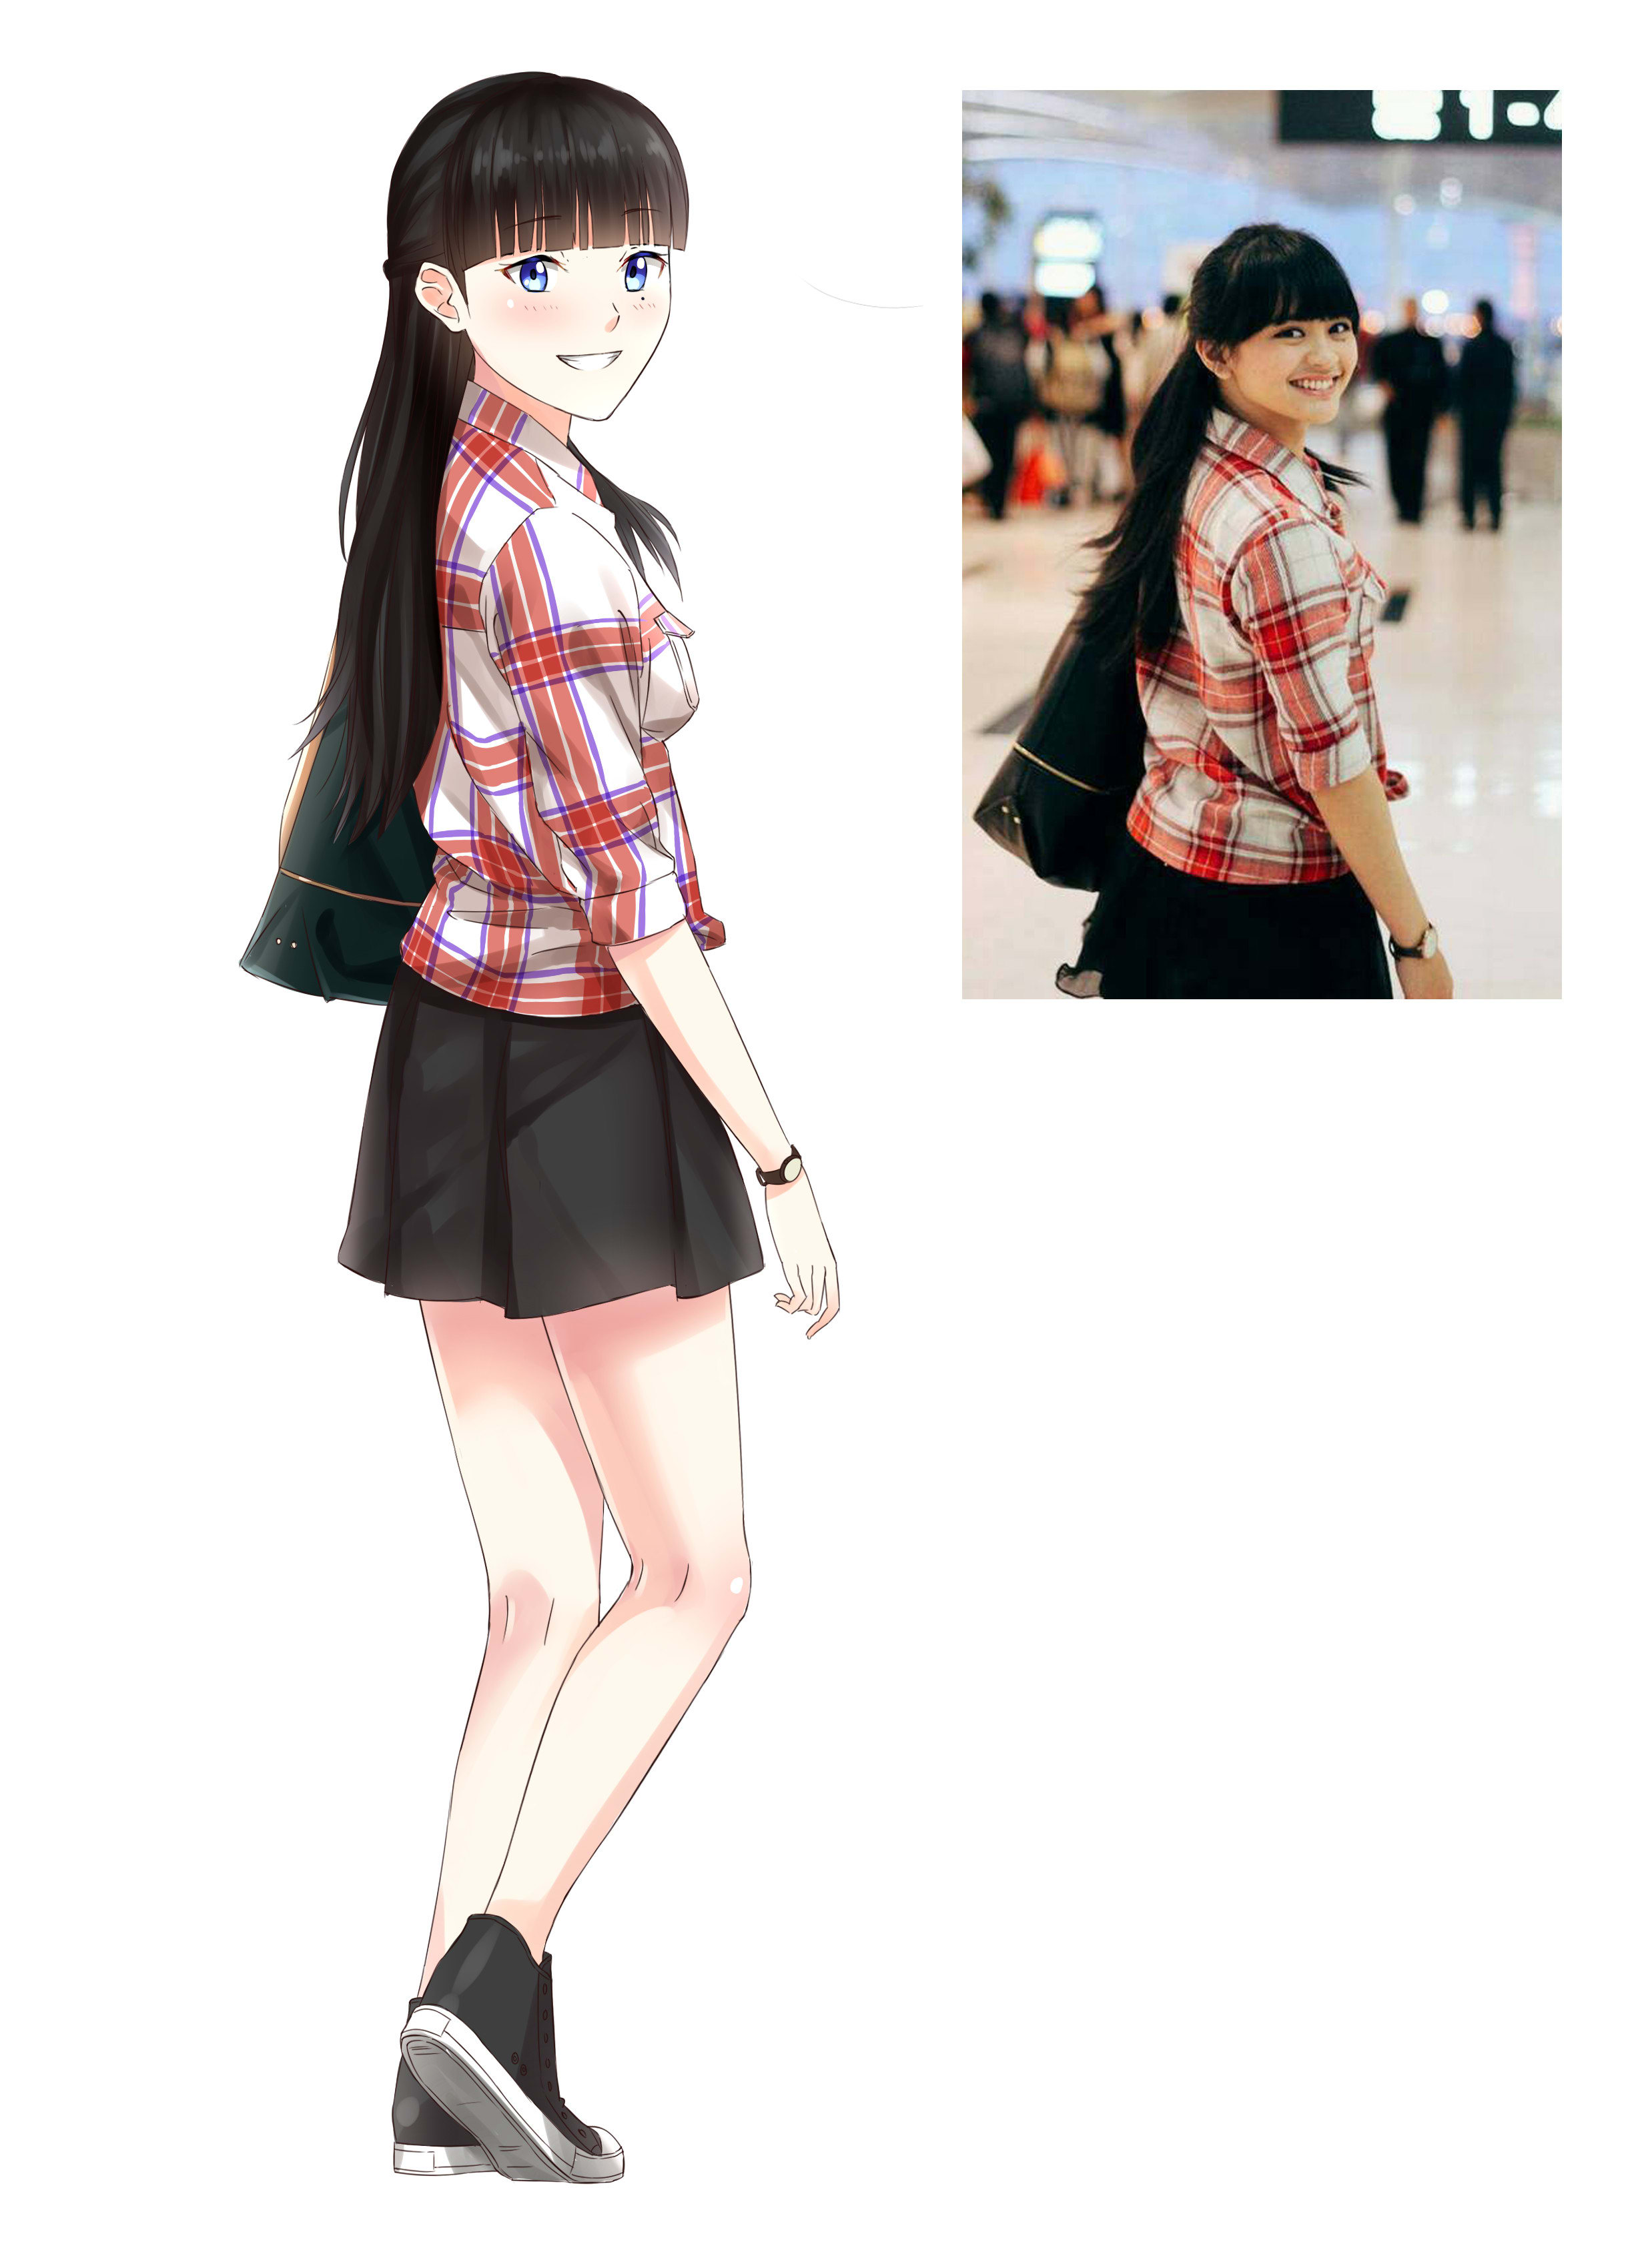 Turn your photo into anime drawing by Ringgosyah | Fiverr